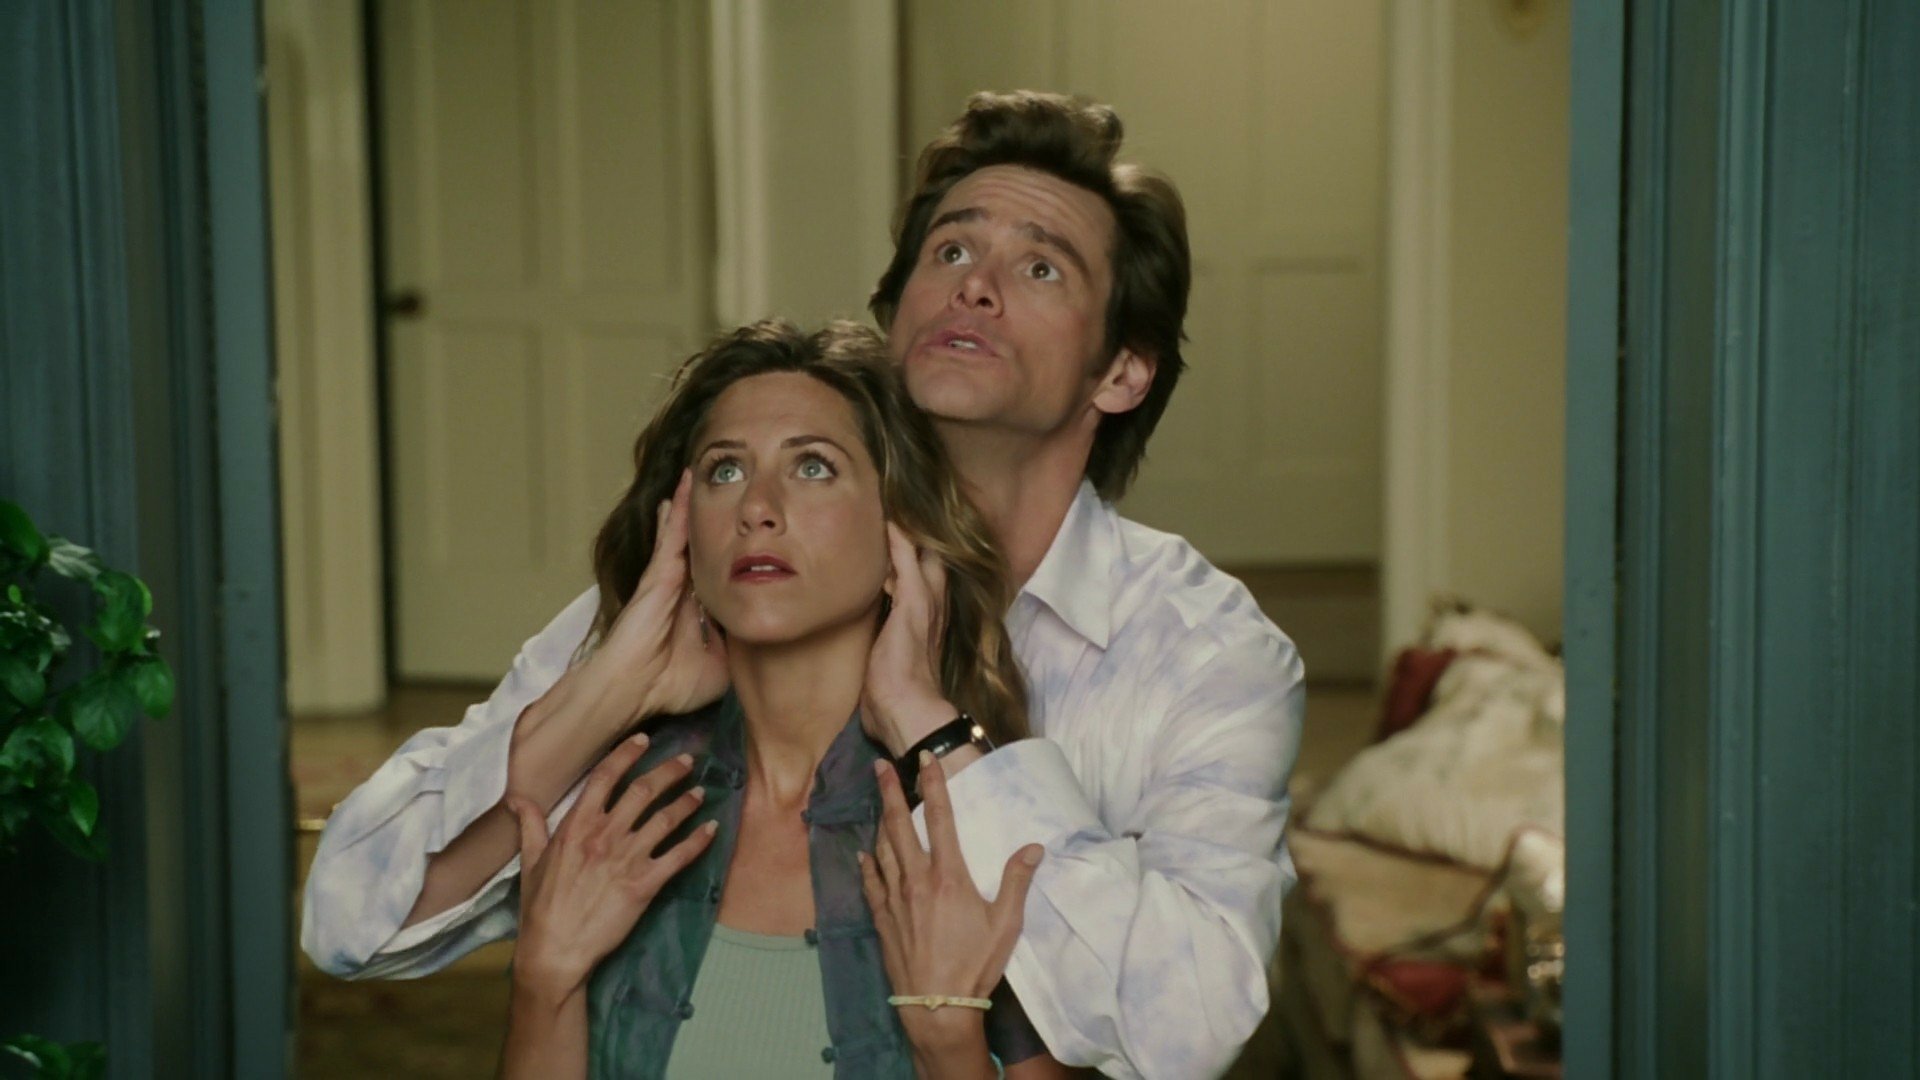 Bruce Almighty HD Wallpaper Background Image 1920x1080 image